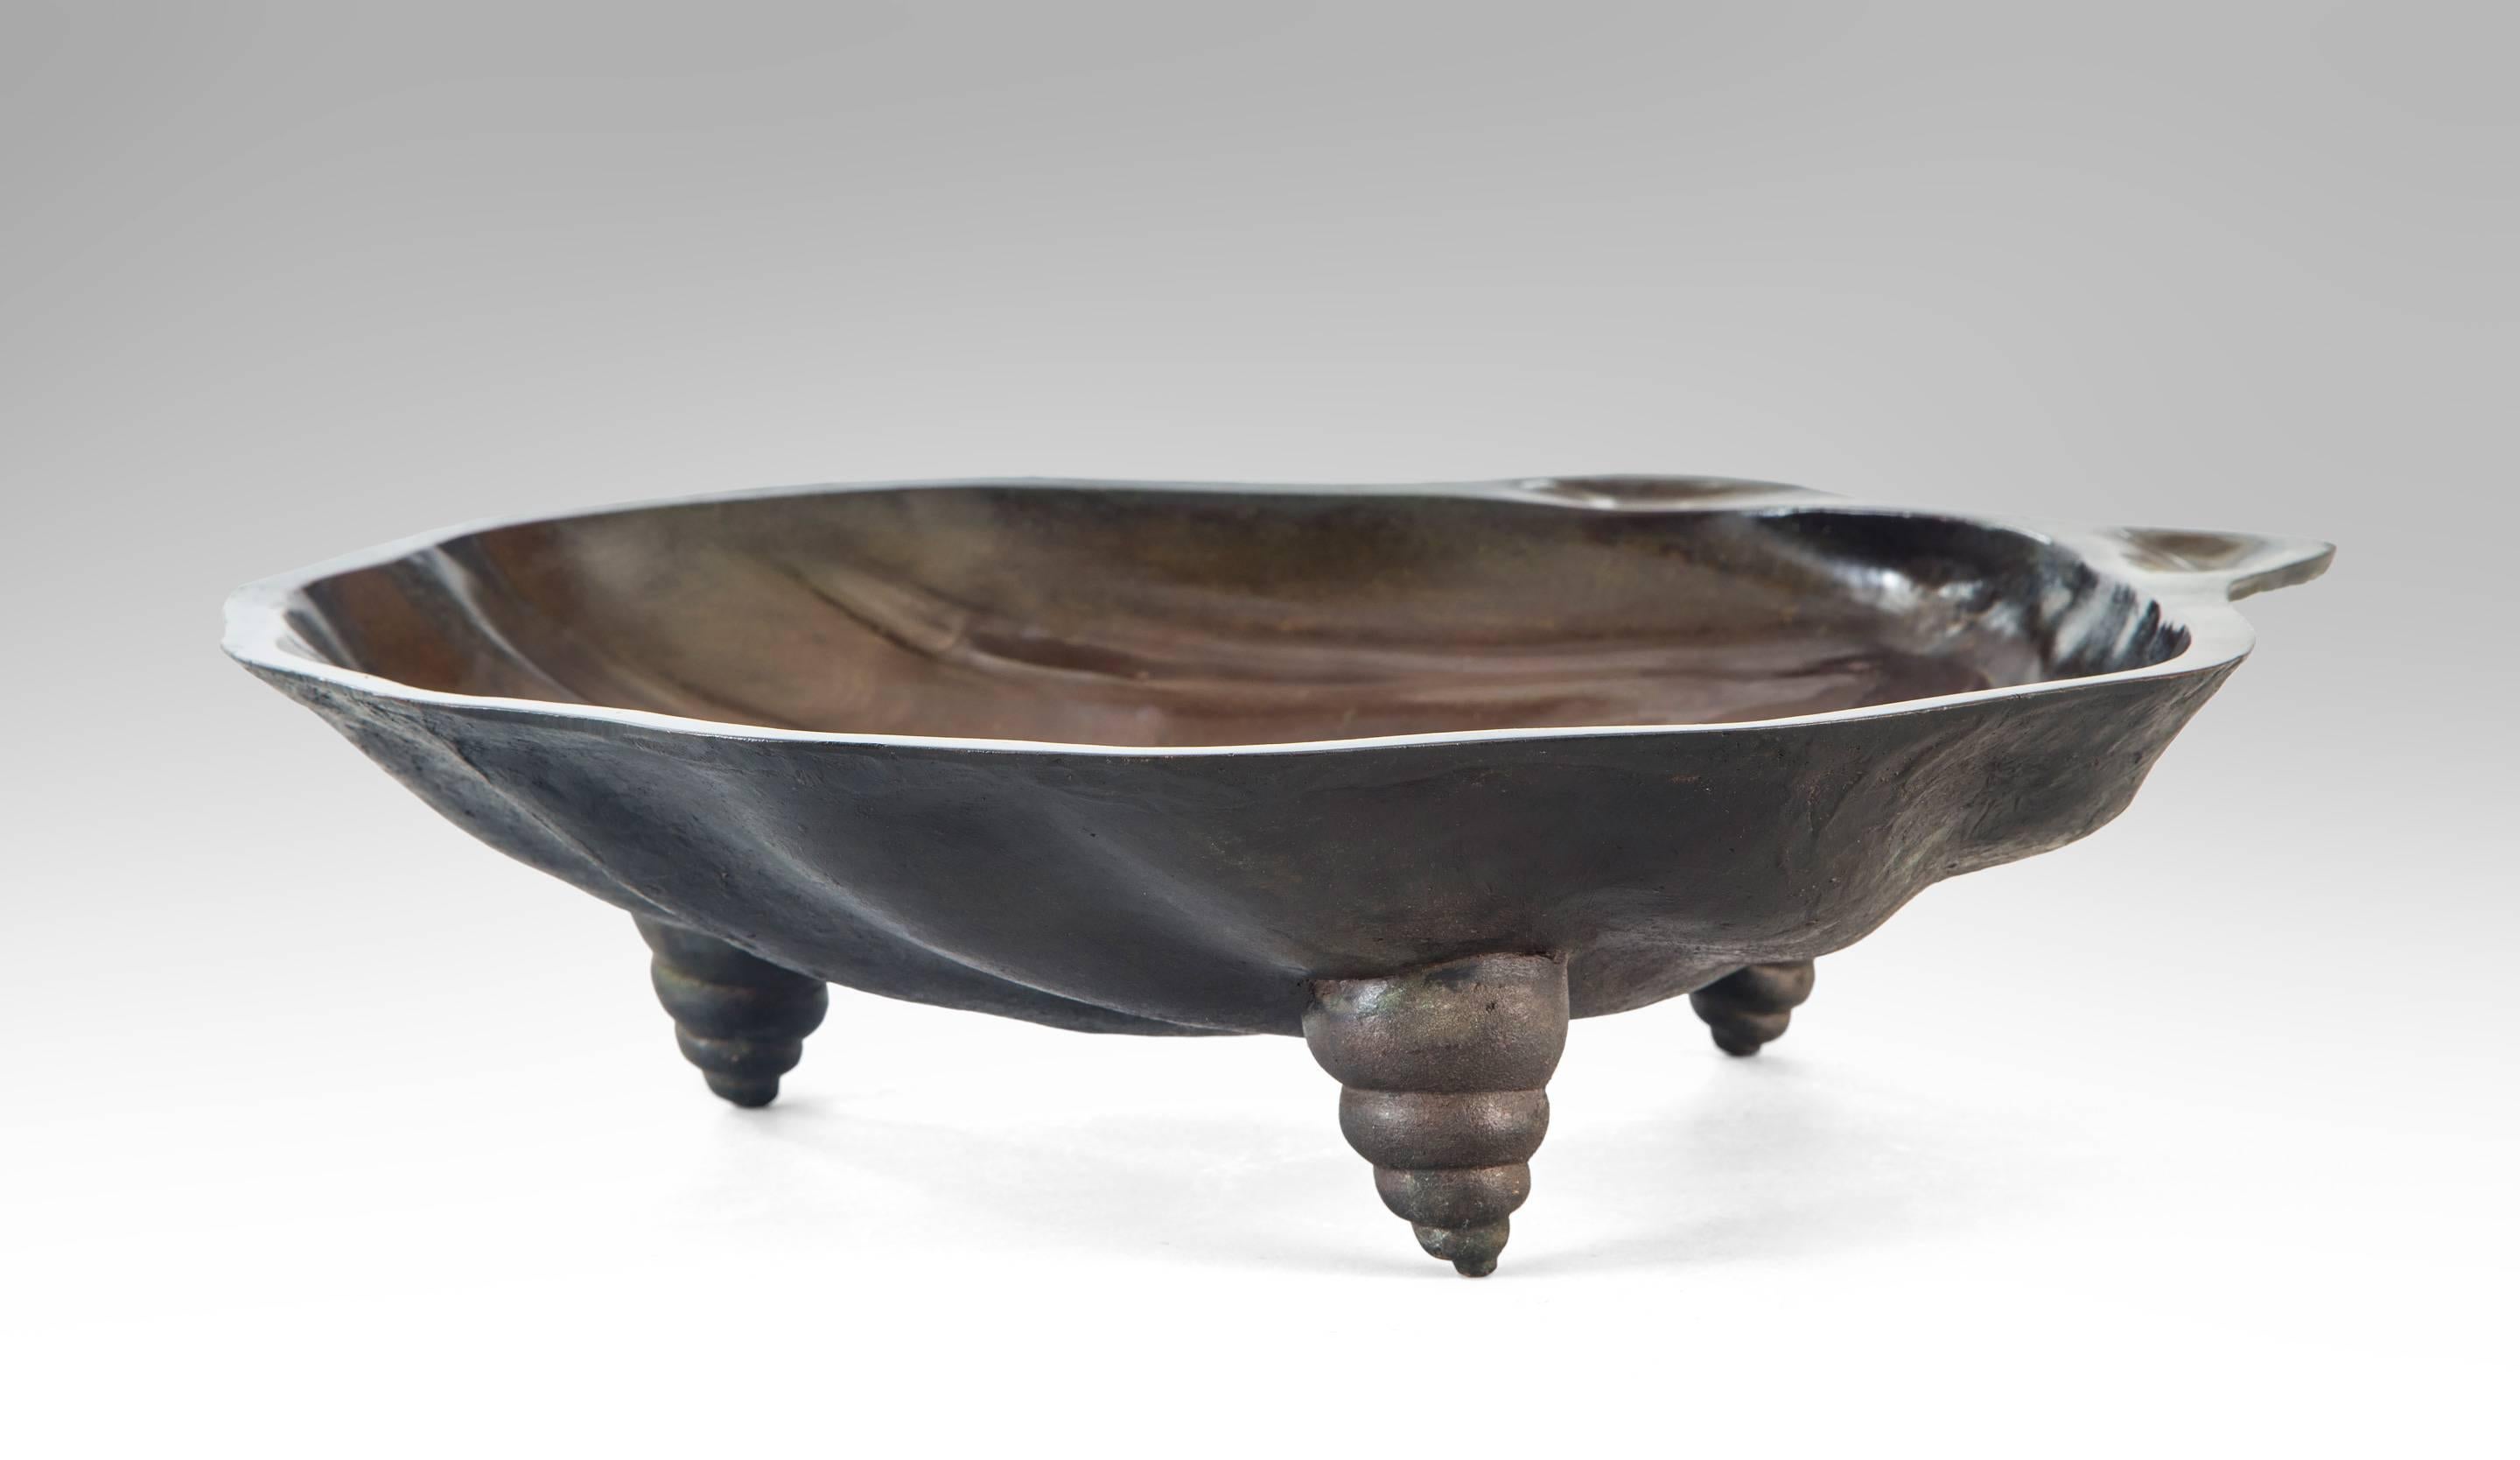 A Large Japanese Green and Brown Patinated Bronze Shell Dish (Bowl) In Good Condition For Sale In New York, NY